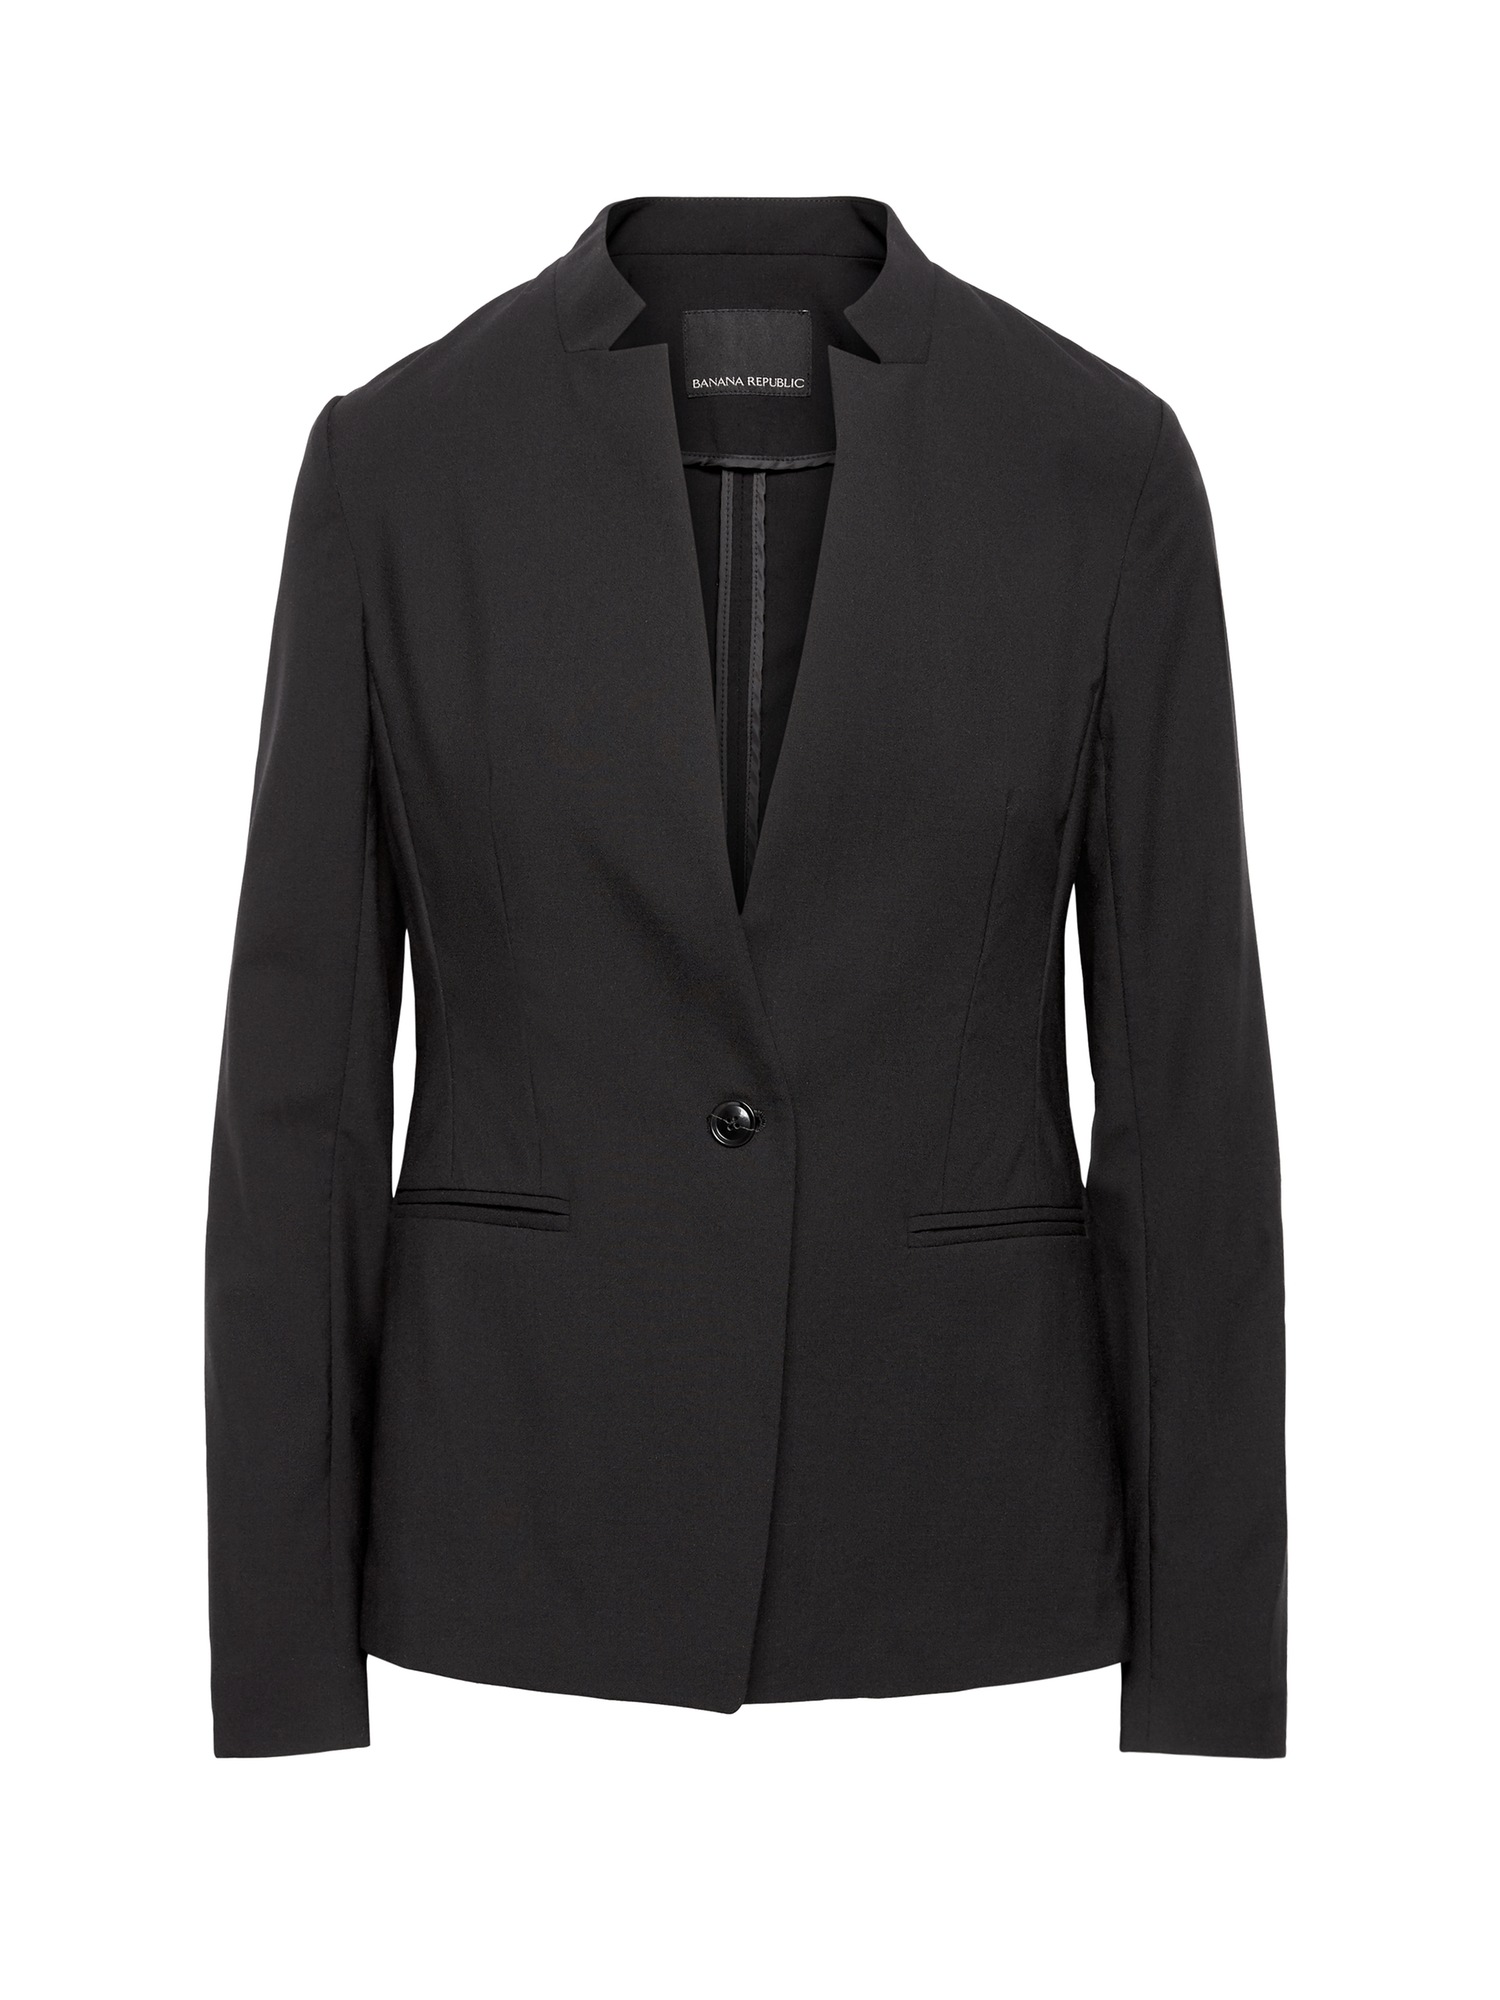 Long and Lean-Fit Lightweight Wool Blazer